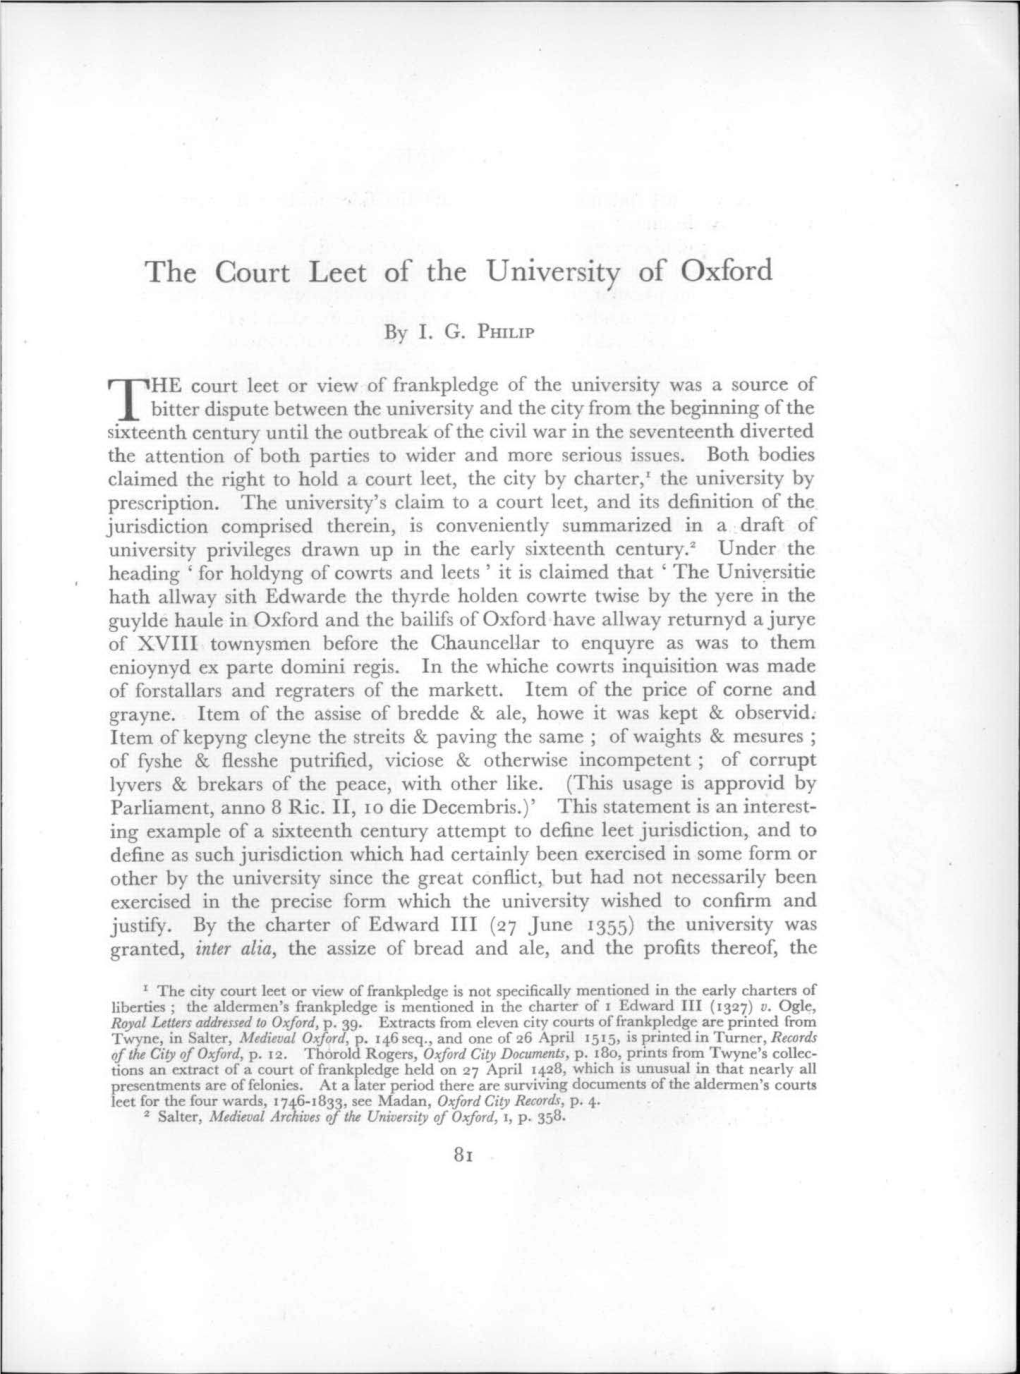 The Court Leet of the University of Oxford